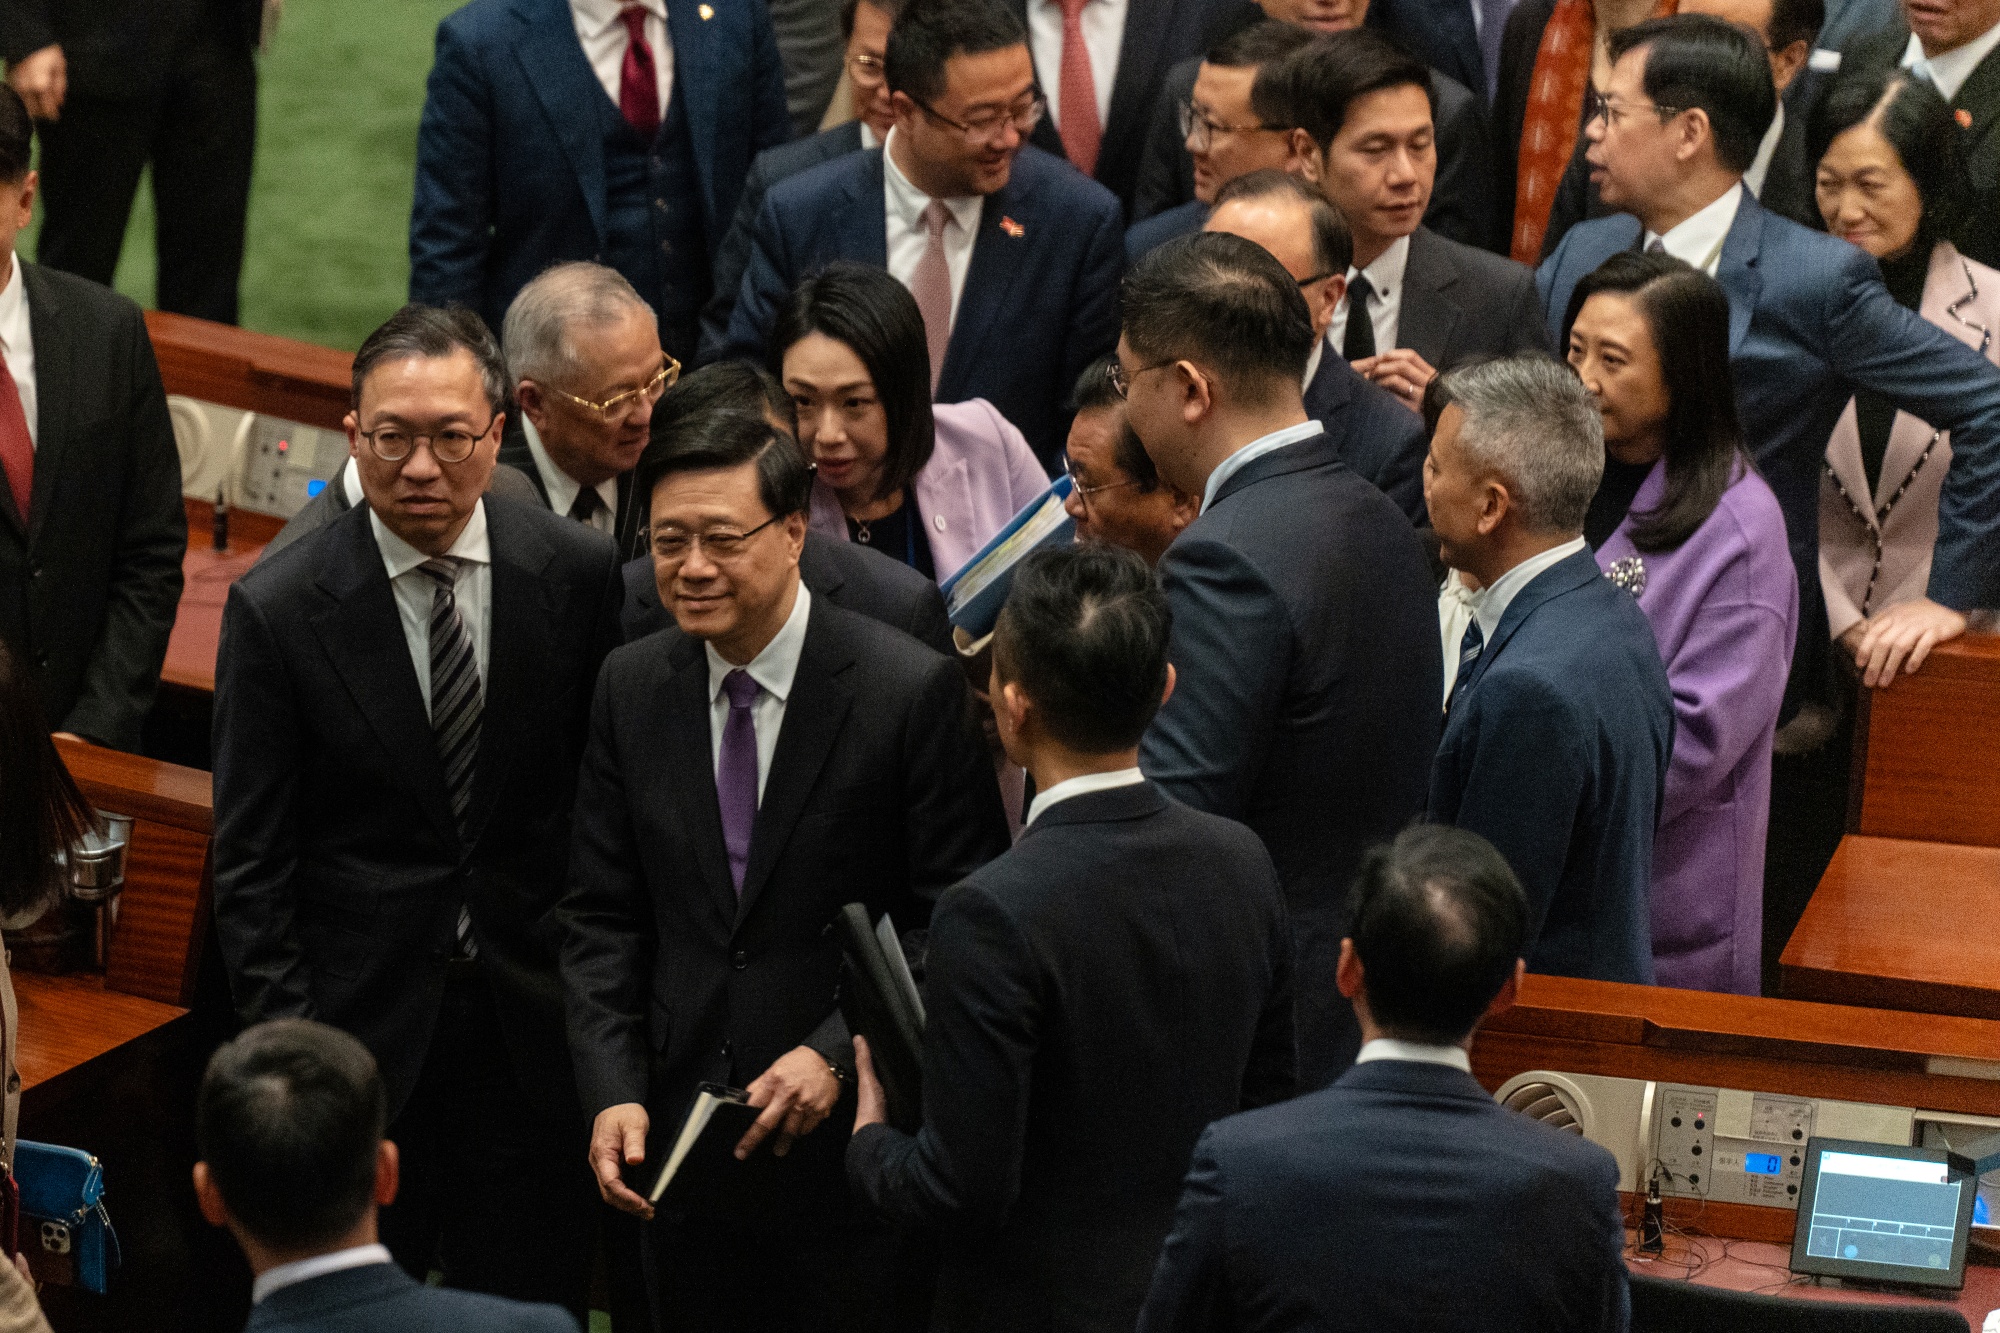 John Lee, center, following the passing of Article 23 at the Legislative Council in Hong Kong, on March 19.